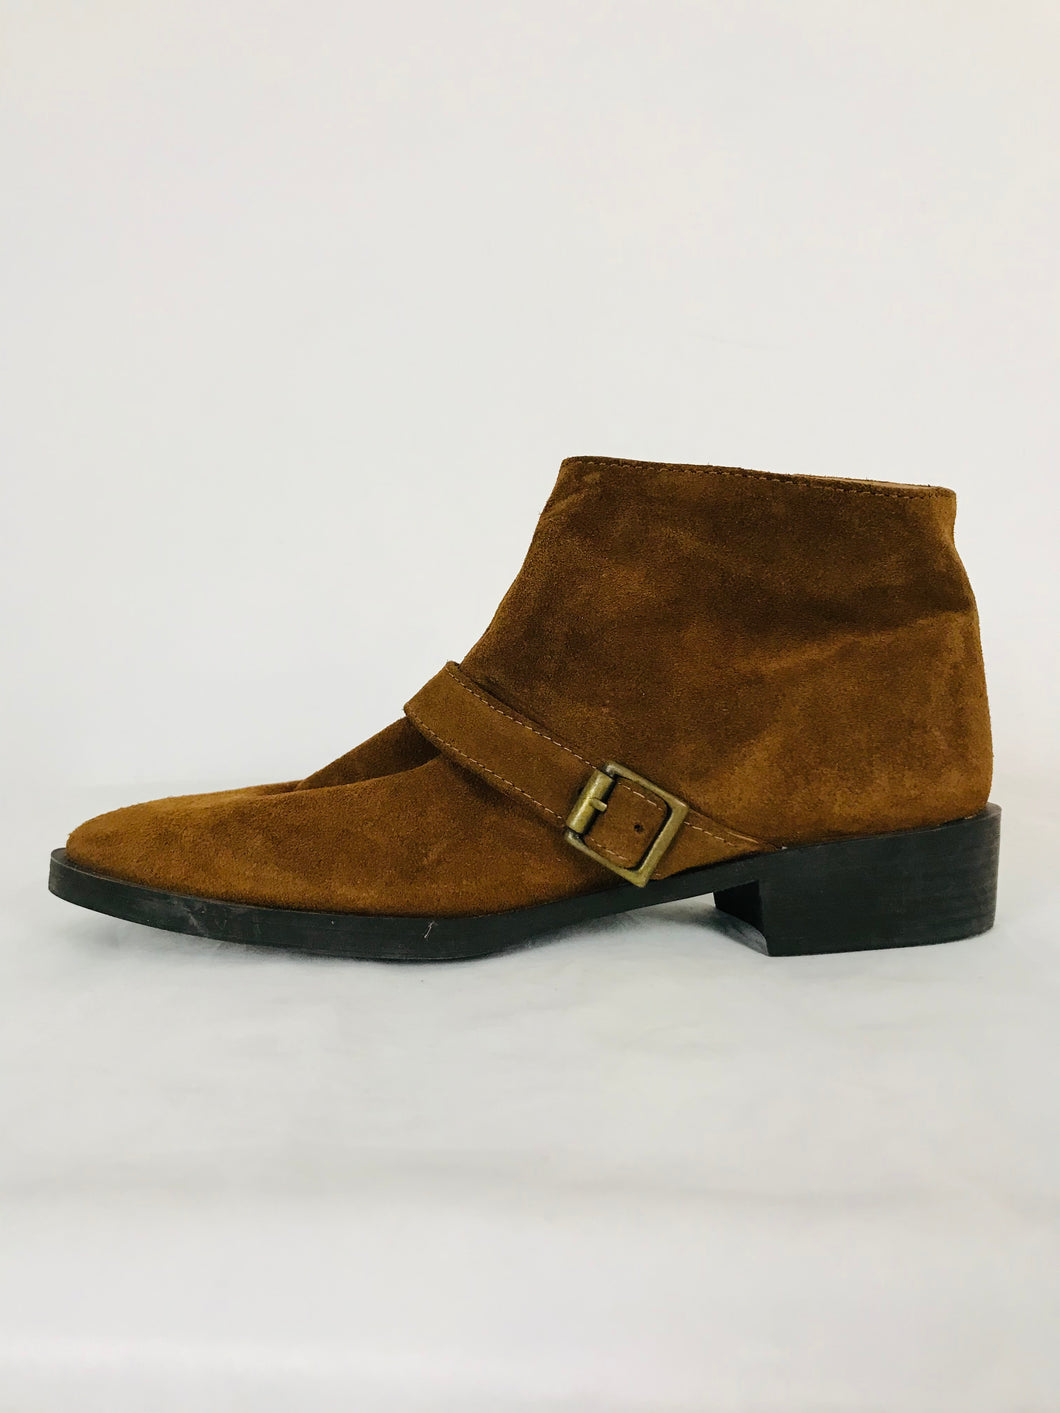 Zara Women’s Suede Leather Buckle Strap Ankle Boots | 38 UK5 | Brown